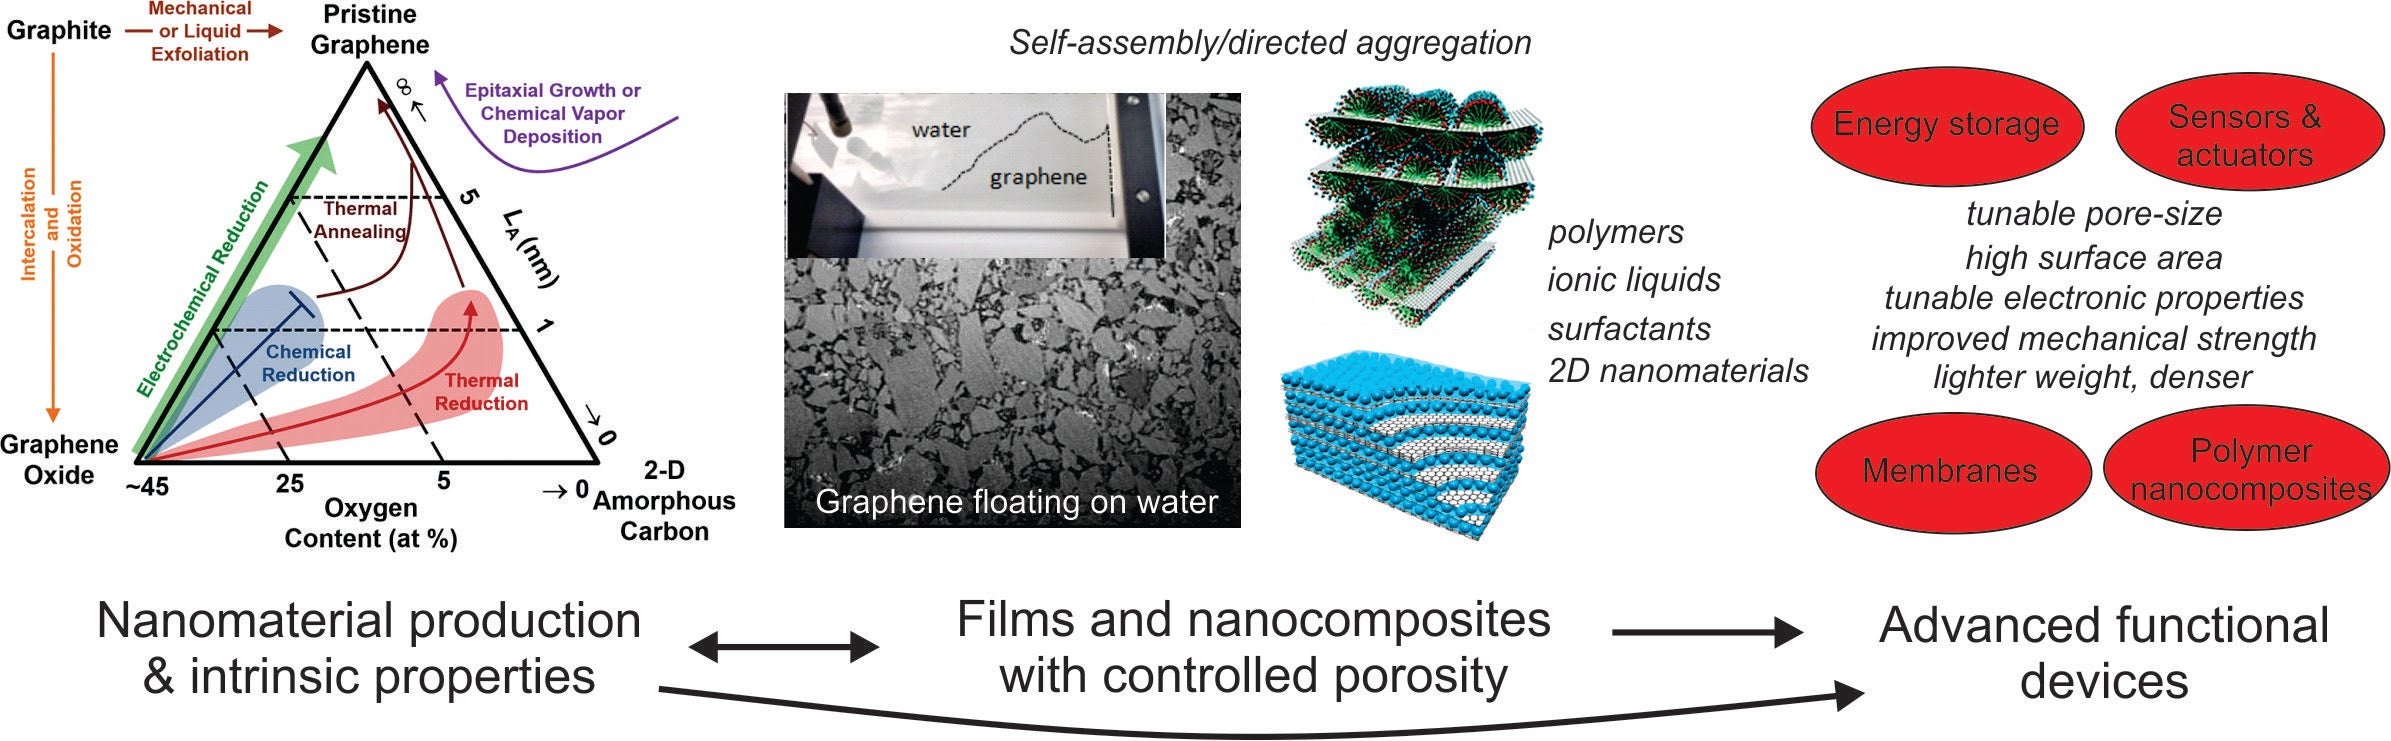 Nanomaterial production and intrinsic properties to films and nanocomposites with controlled porosity to advanced functional devices